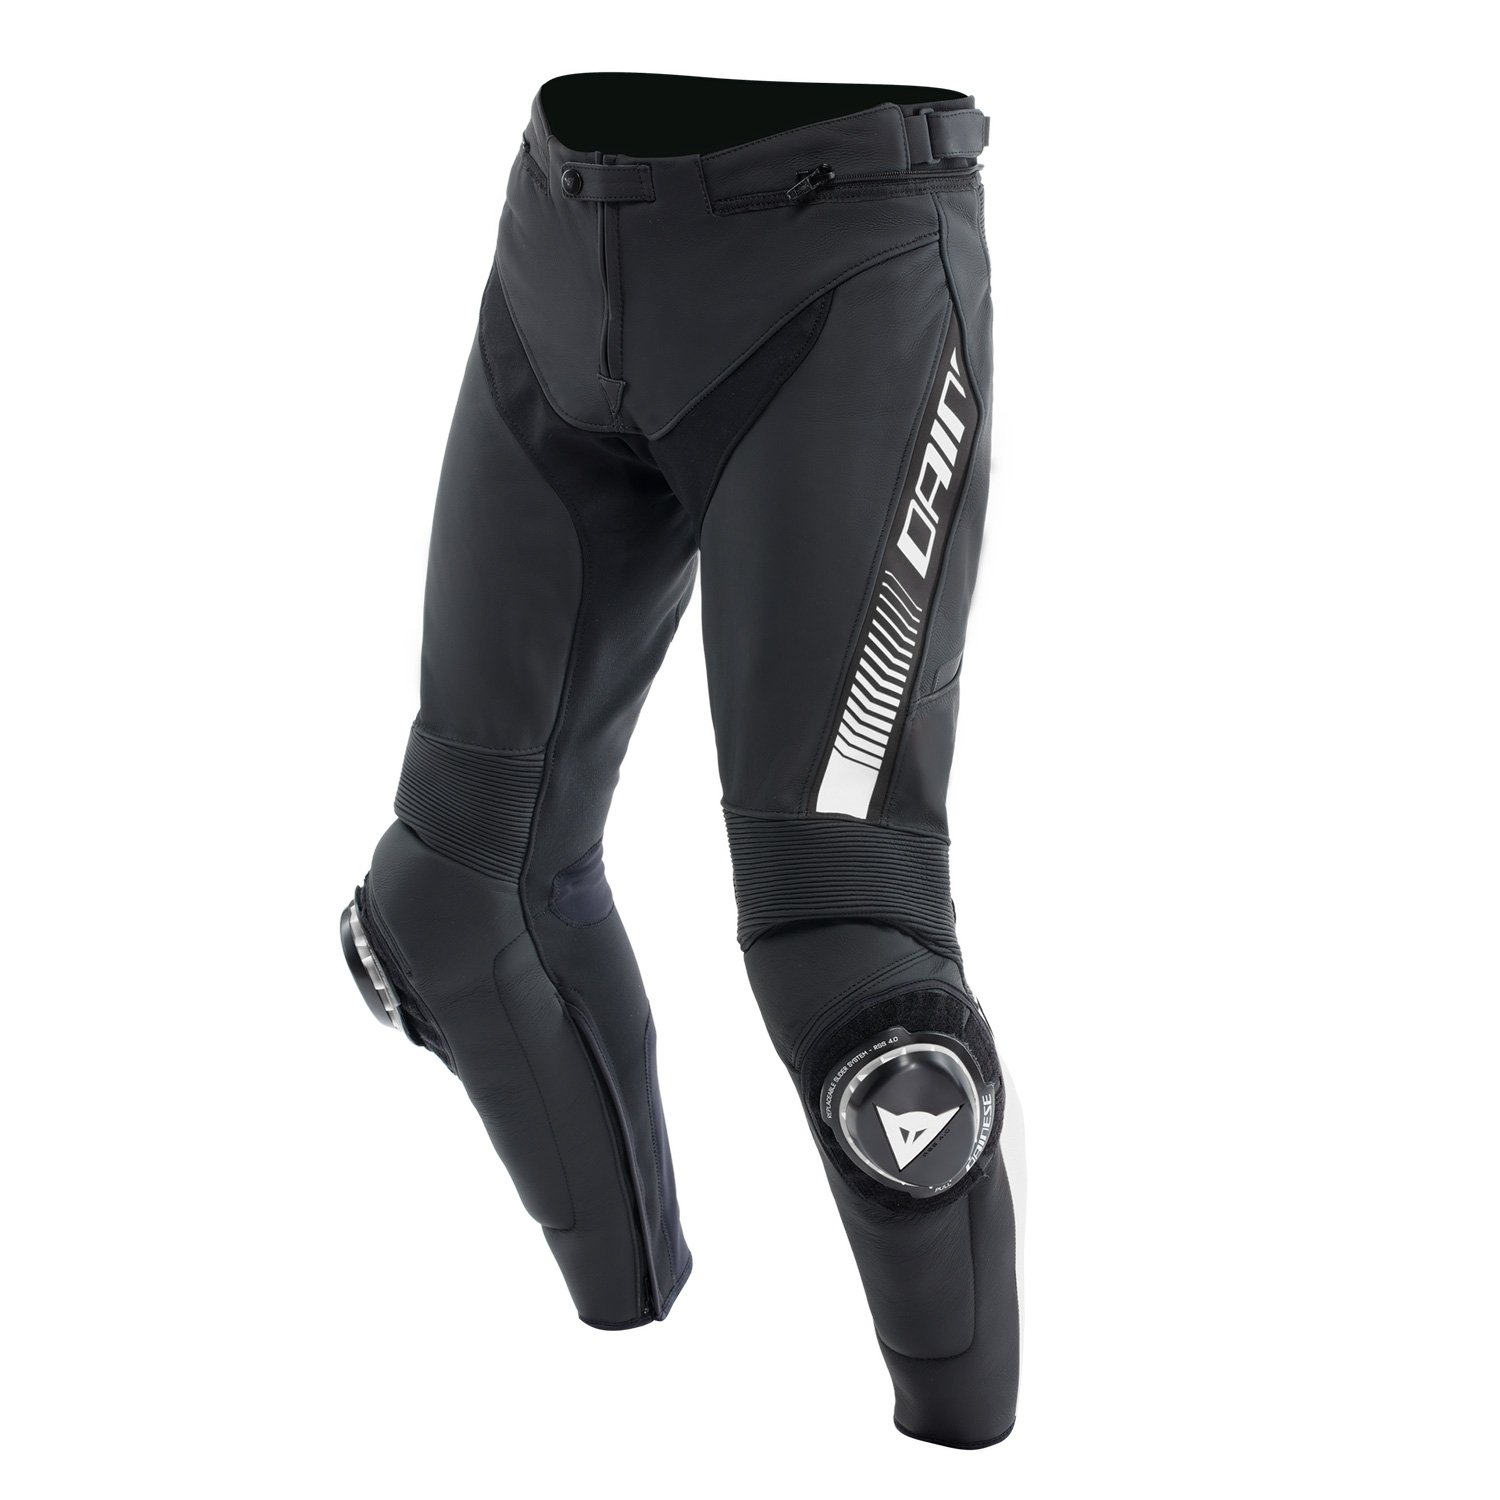 Image of Dainese Super Speed Leather Pants Black White Size 48 ID 8051019640000